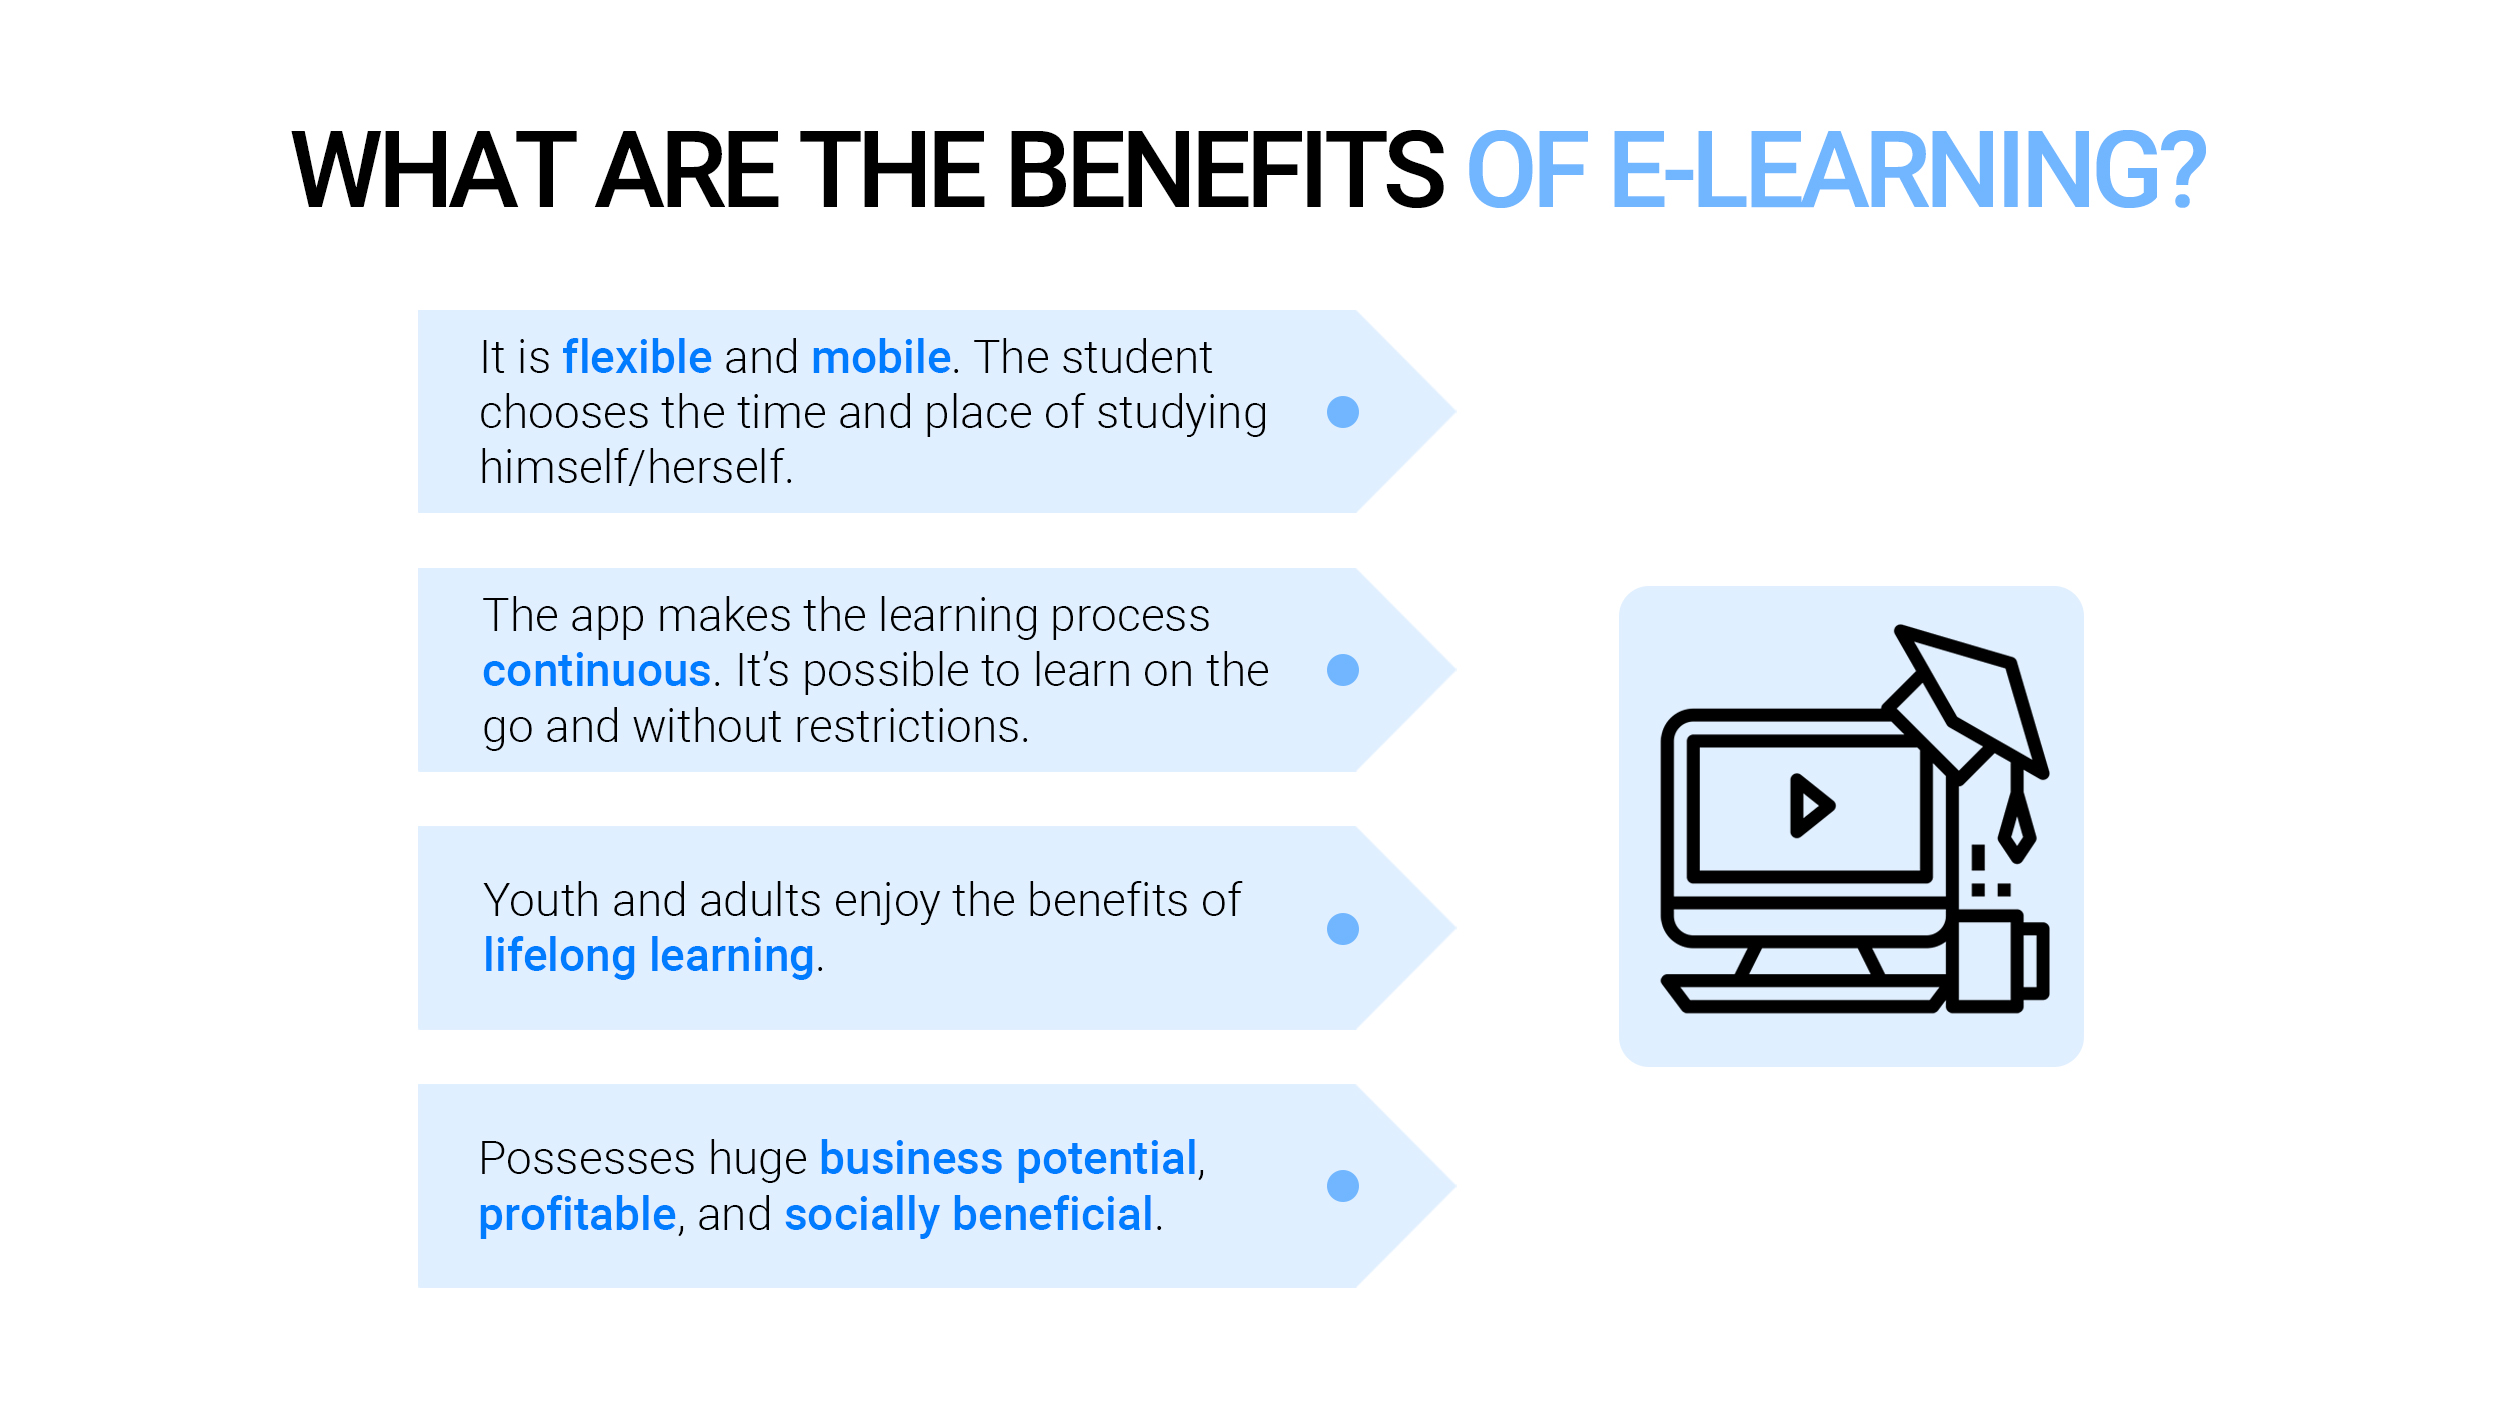 What are the benefits of eLearning